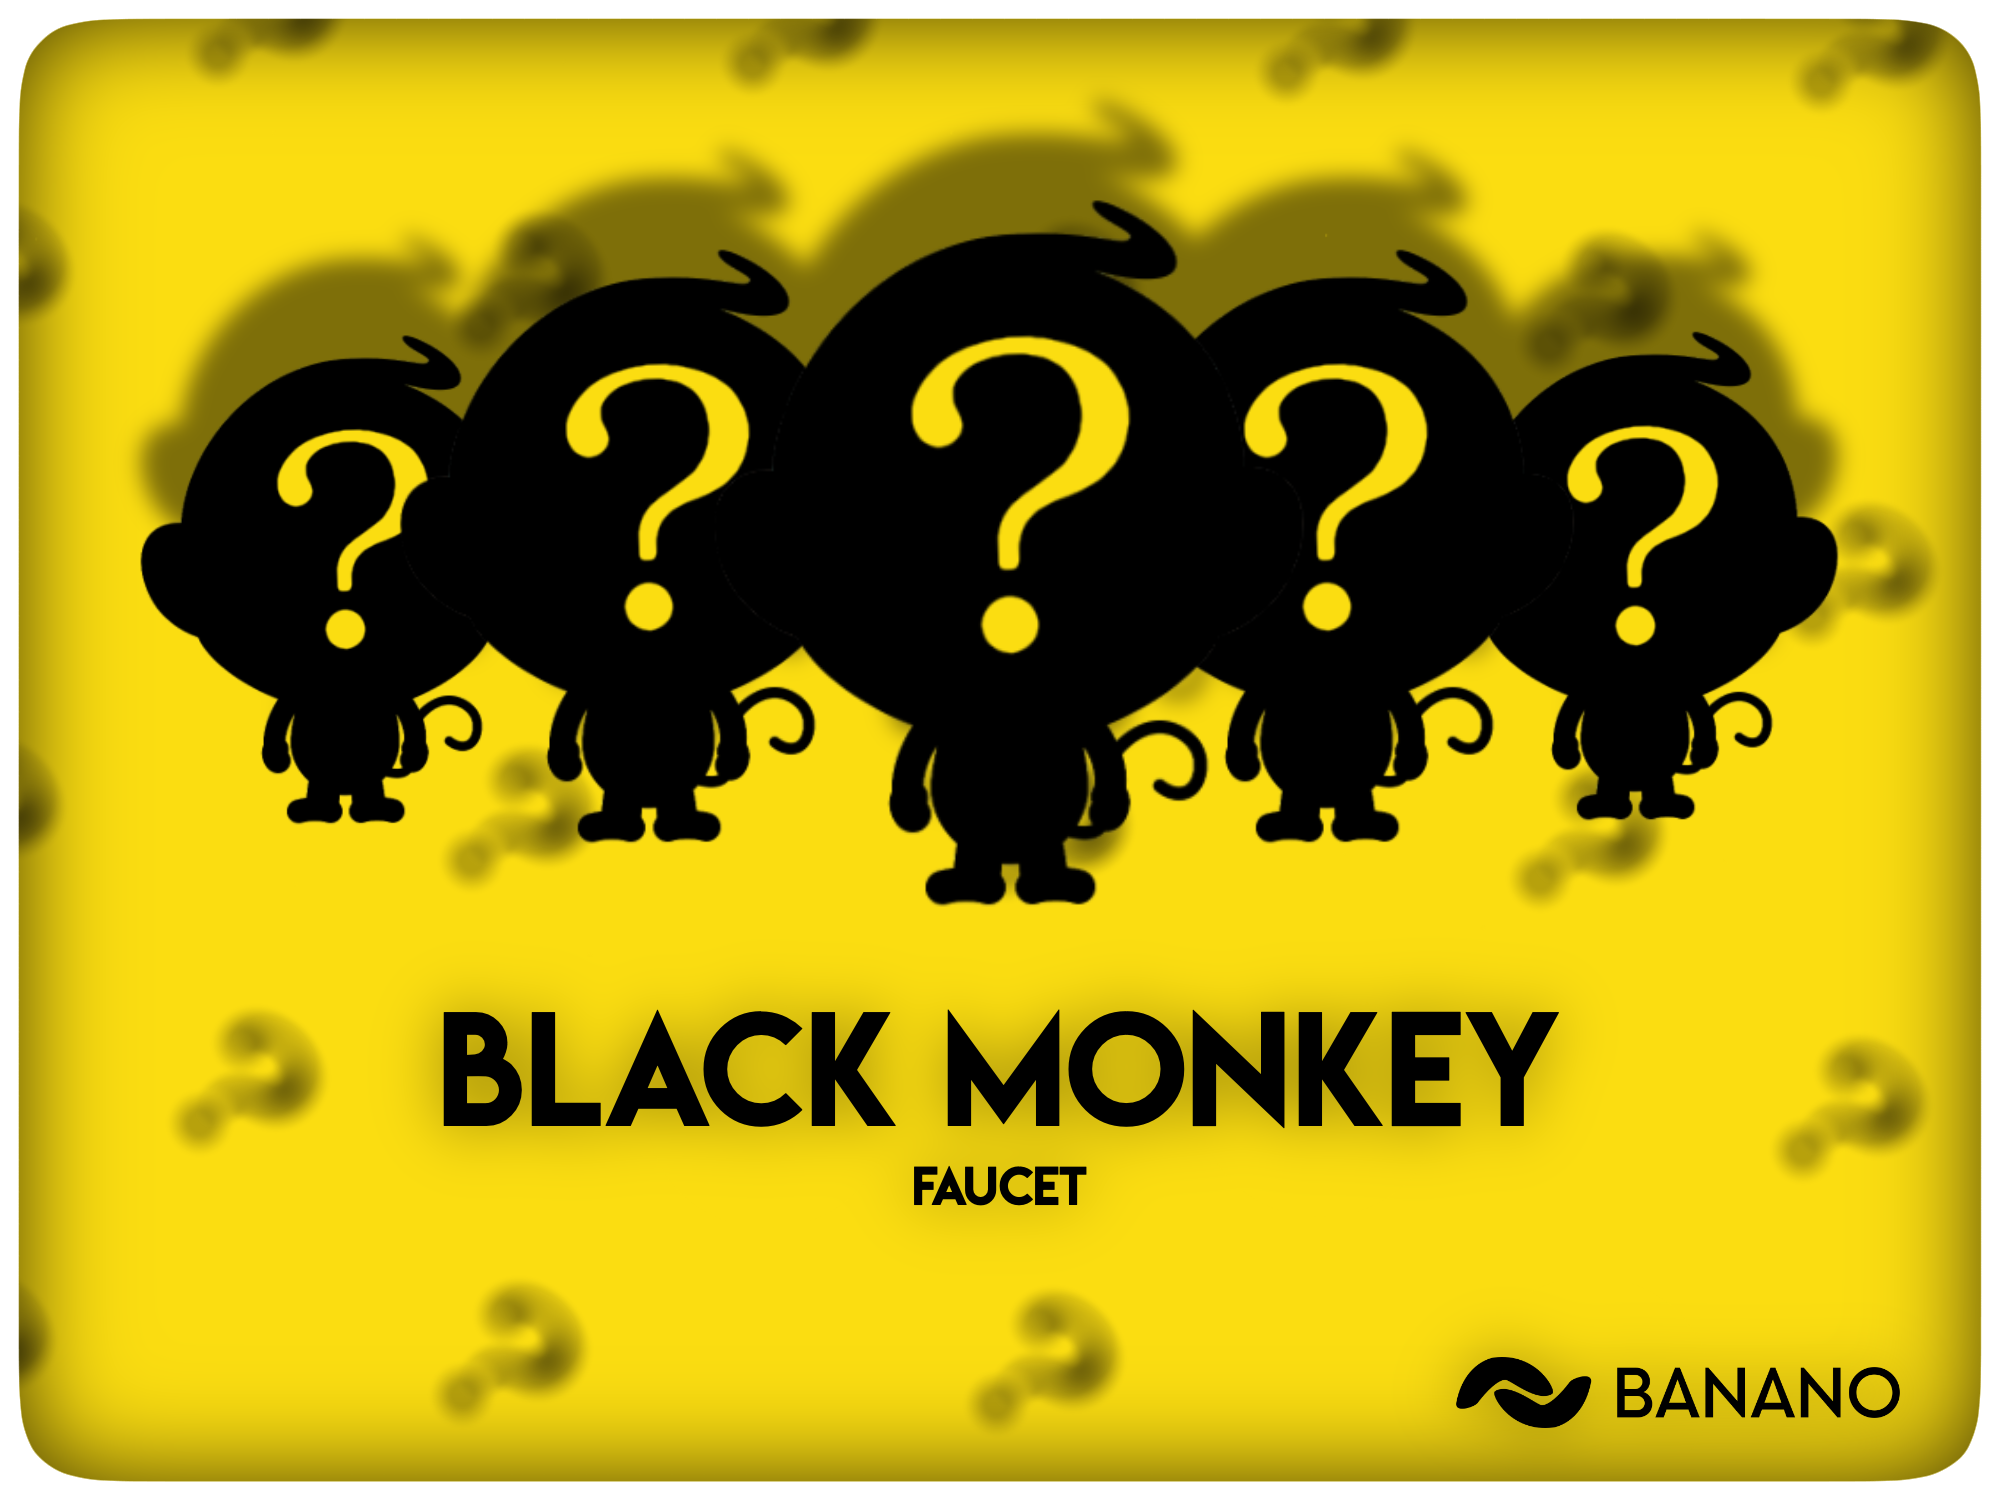 BANANO Faucet Game ‘Black Monkey’ Round 13 about to start (24 hours only)!